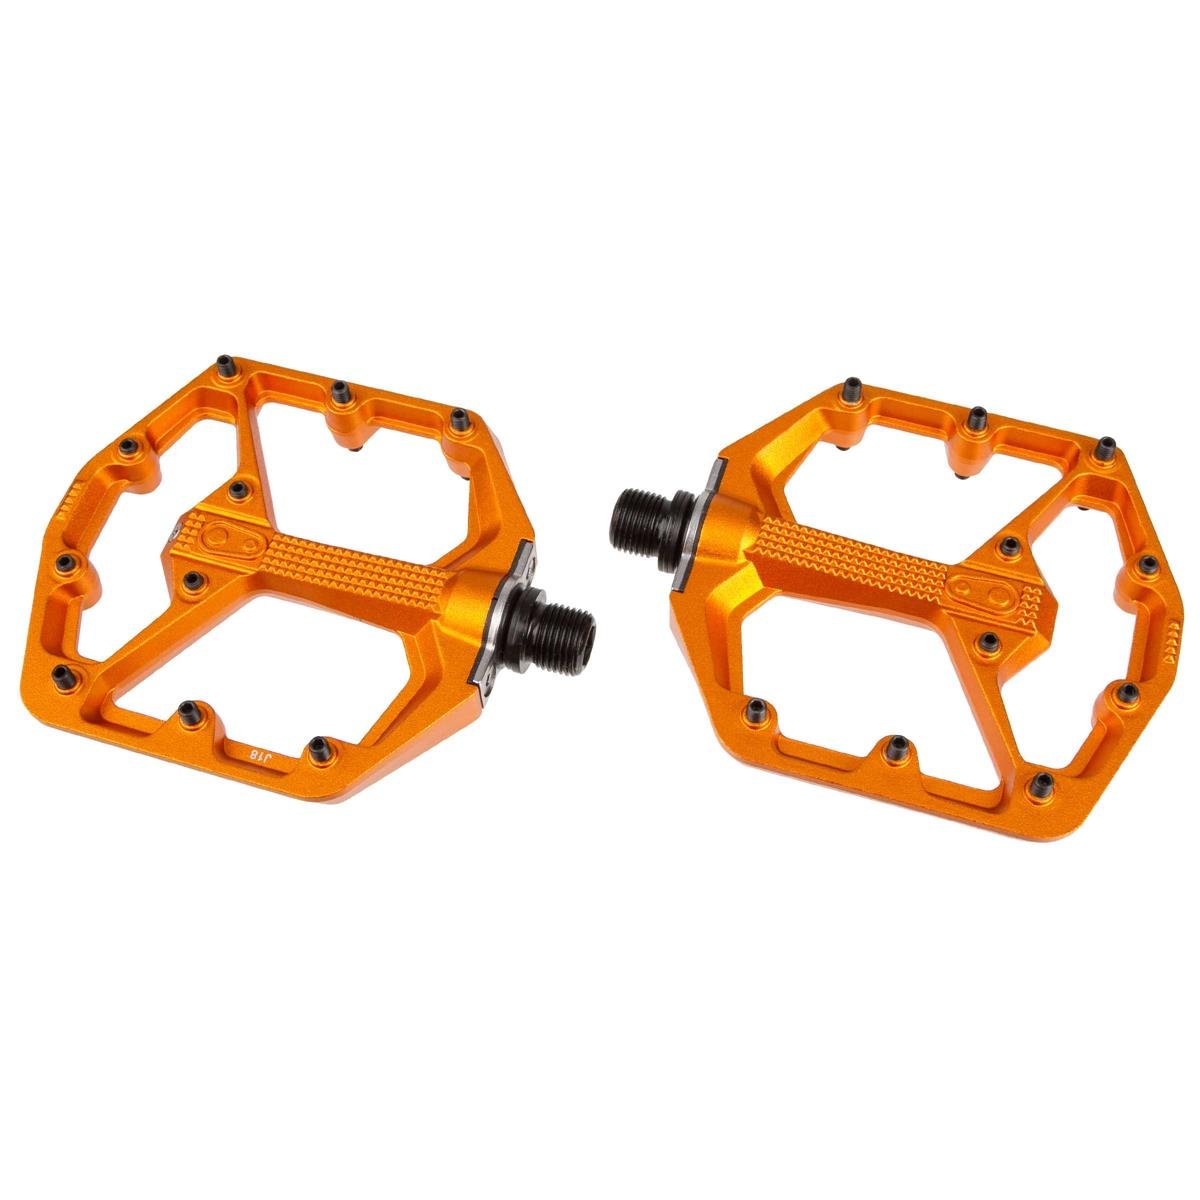 Crankbrothers Pédales Stamp 7 Limited Edition, Orange, Small